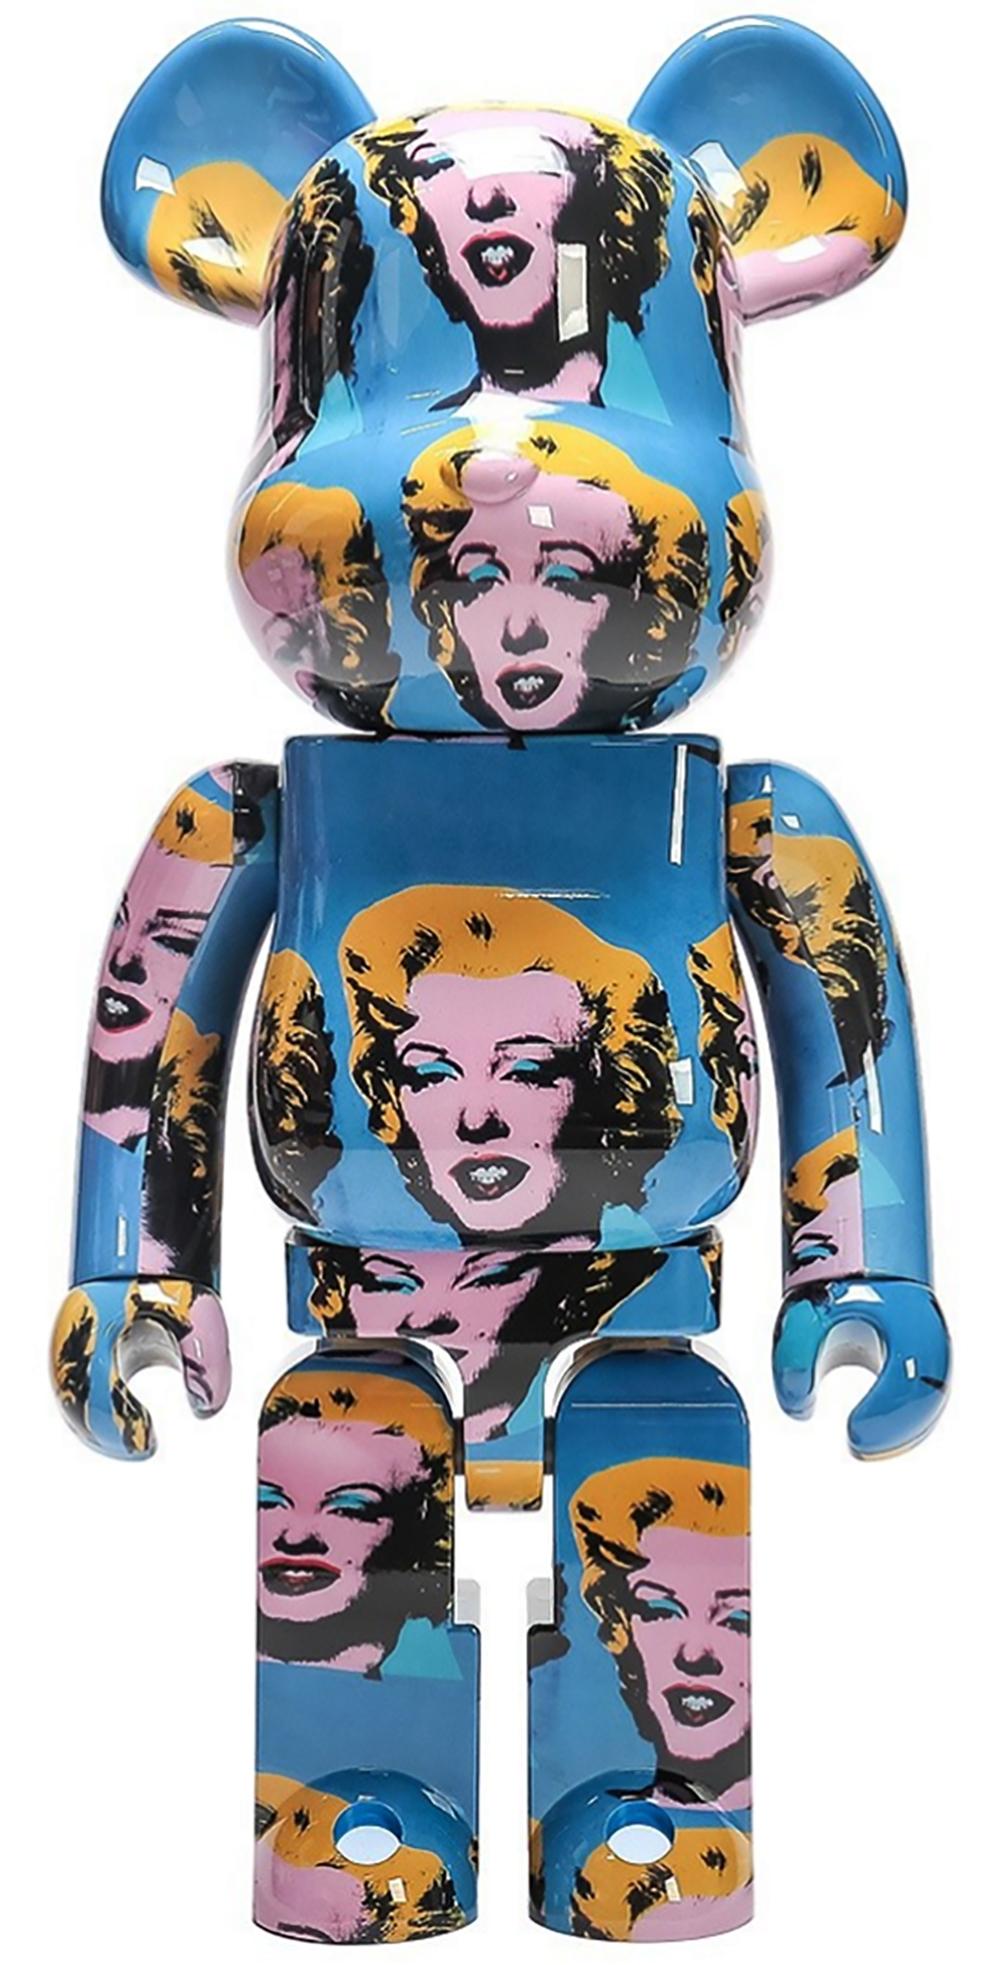 Andy Warhol Bearbrick 400% set of 4 works (Warhol BE@RBRICK)  - Pop Art Sculpture by (after) Andy Warhol